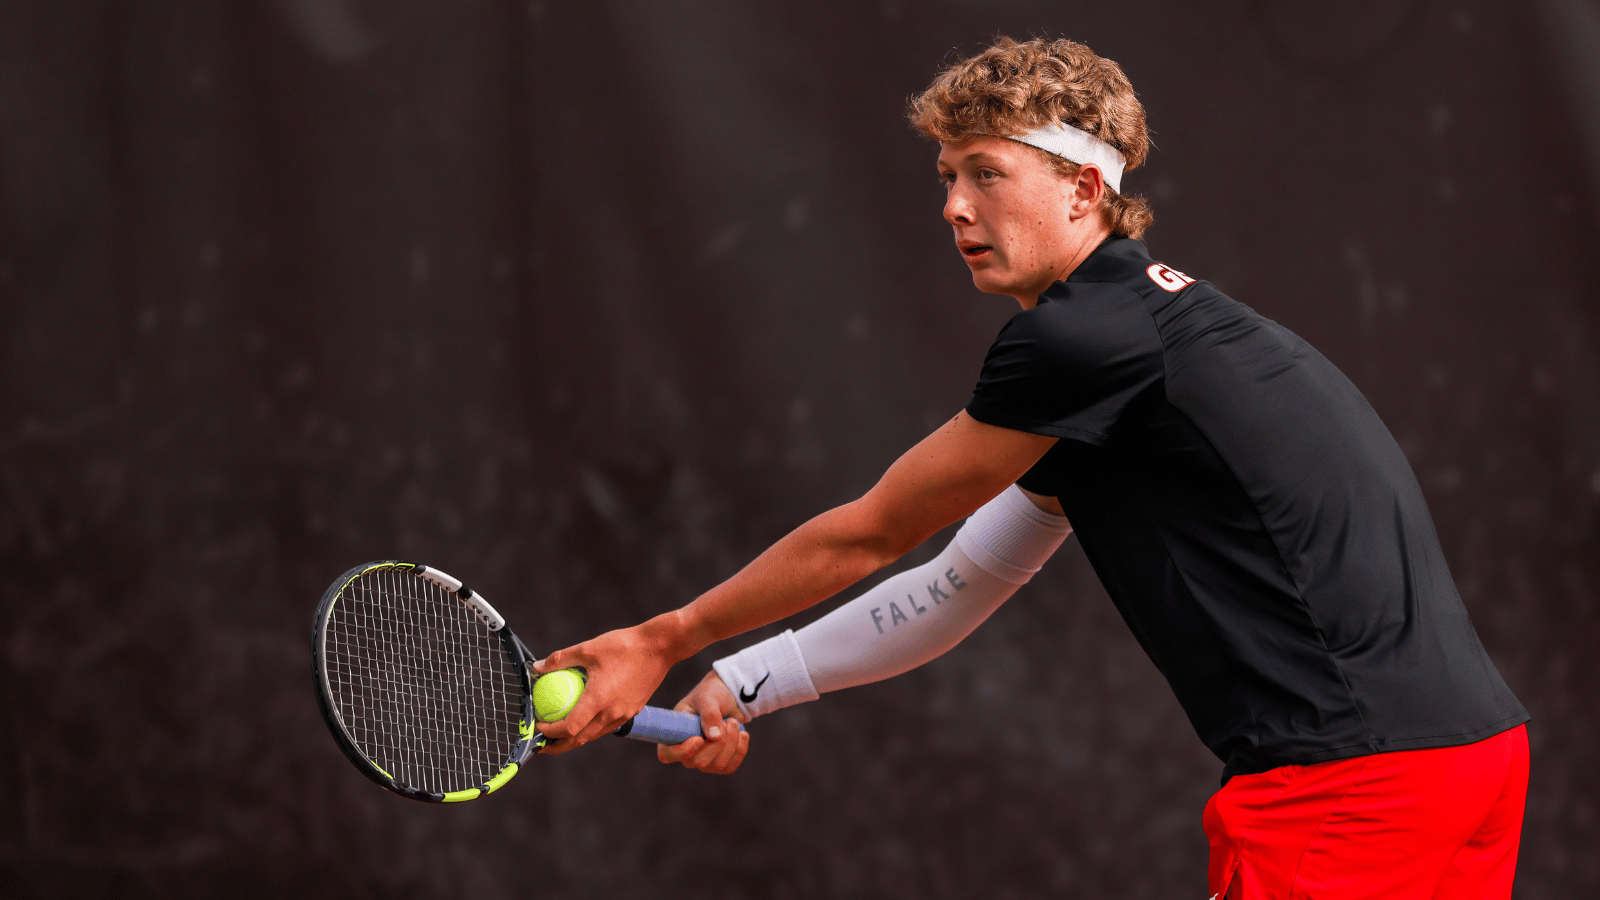 Ethan Quinn, a young teenage tennis player, has turned professional.